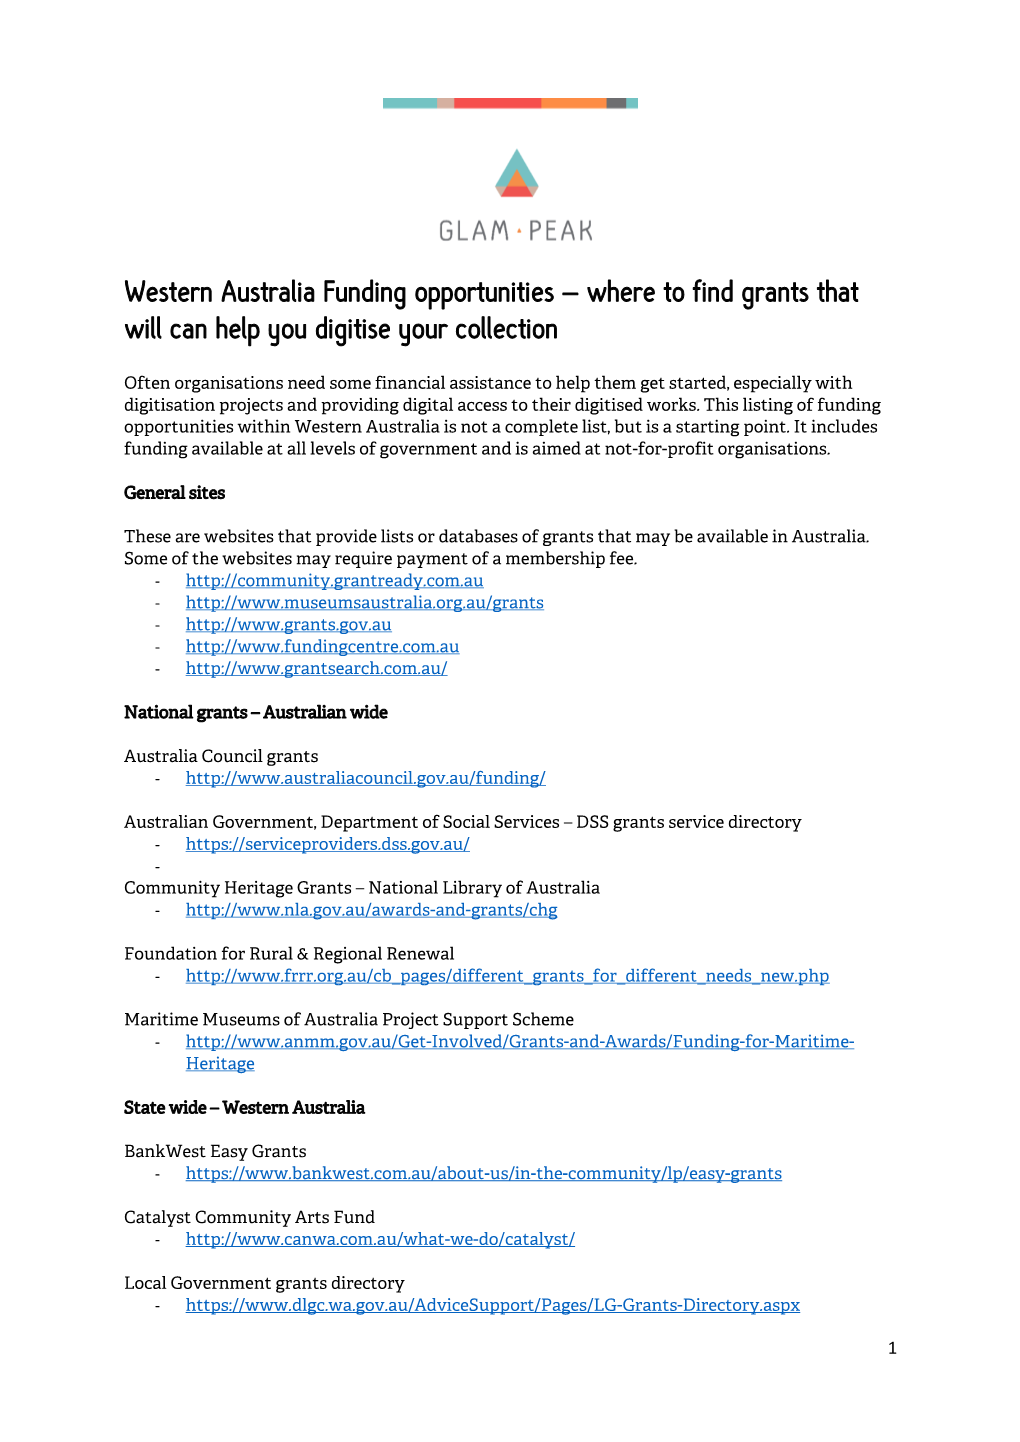 Western Australia Funding Opportunities – Where to Find Grants That Will Can Help You Digitise Your Collection